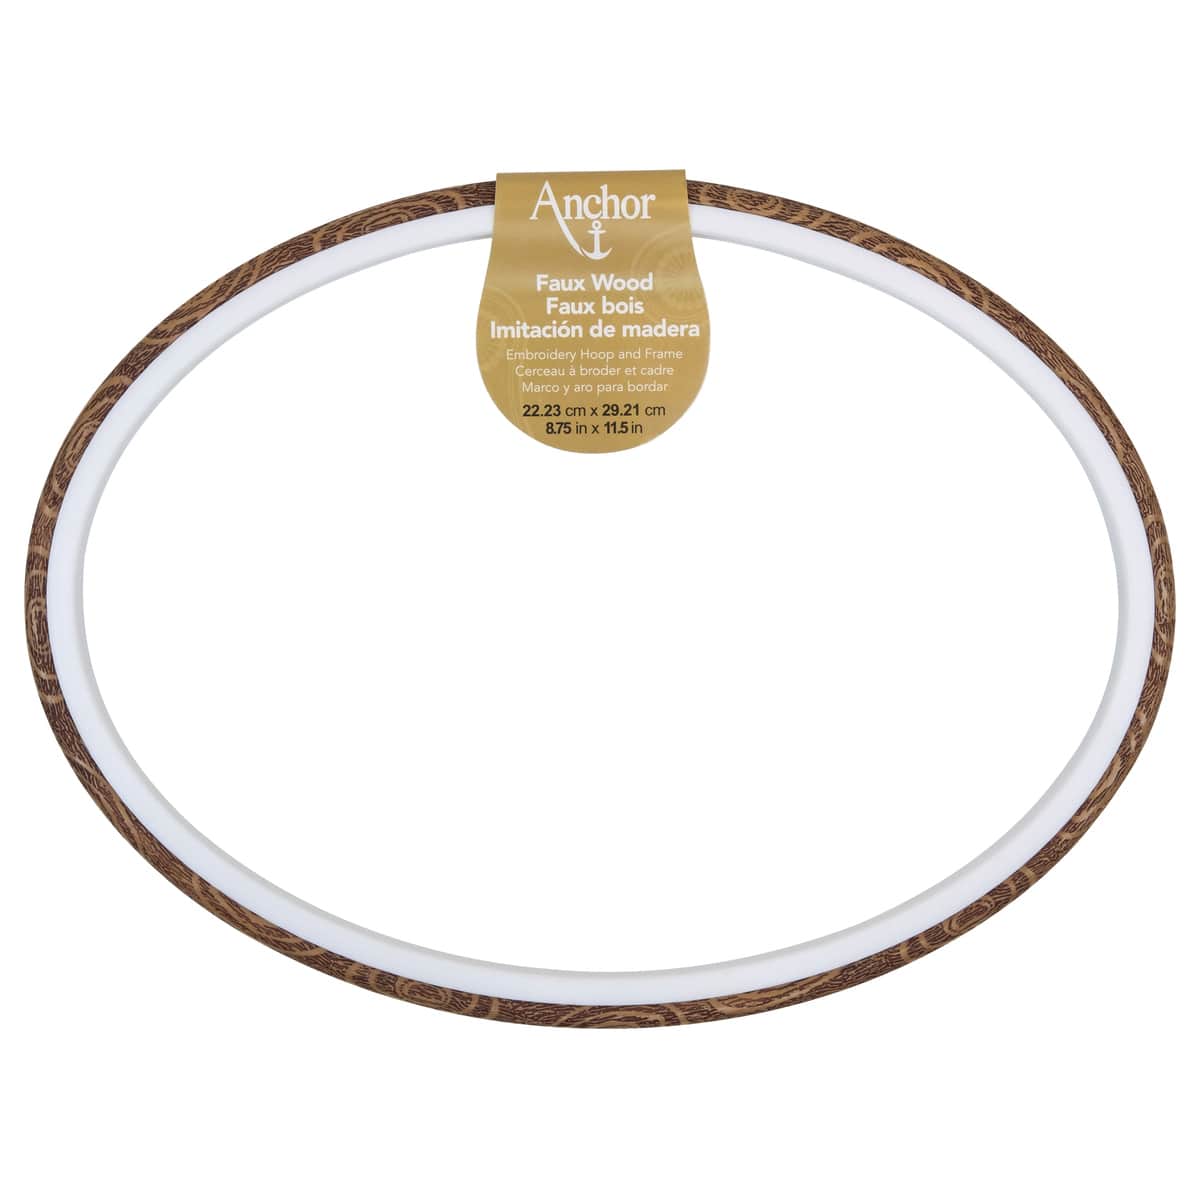 Rico Embroidery Hoop Oval 9.5 x 14.5 cm